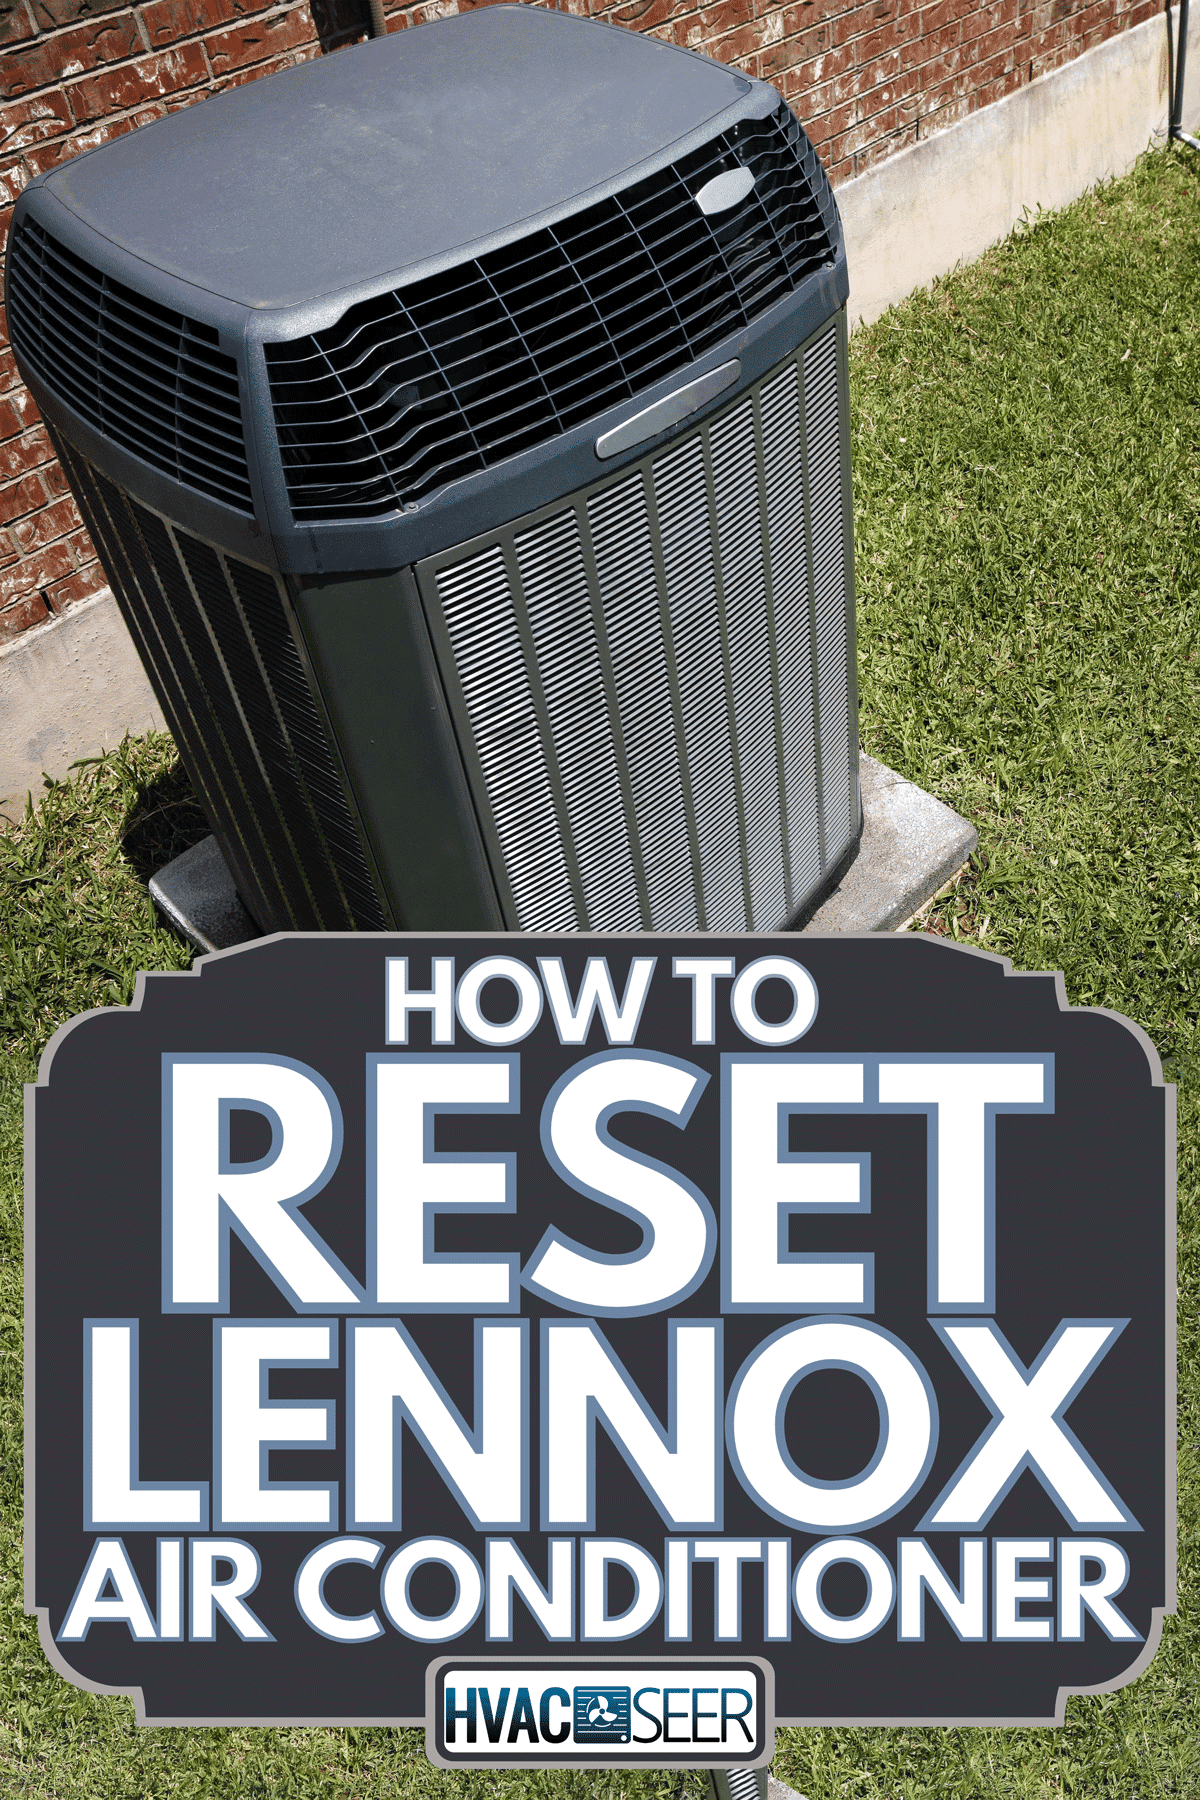 High efficiency modern air conditioner outside the house, How To Reset Lennox Air Conditioner